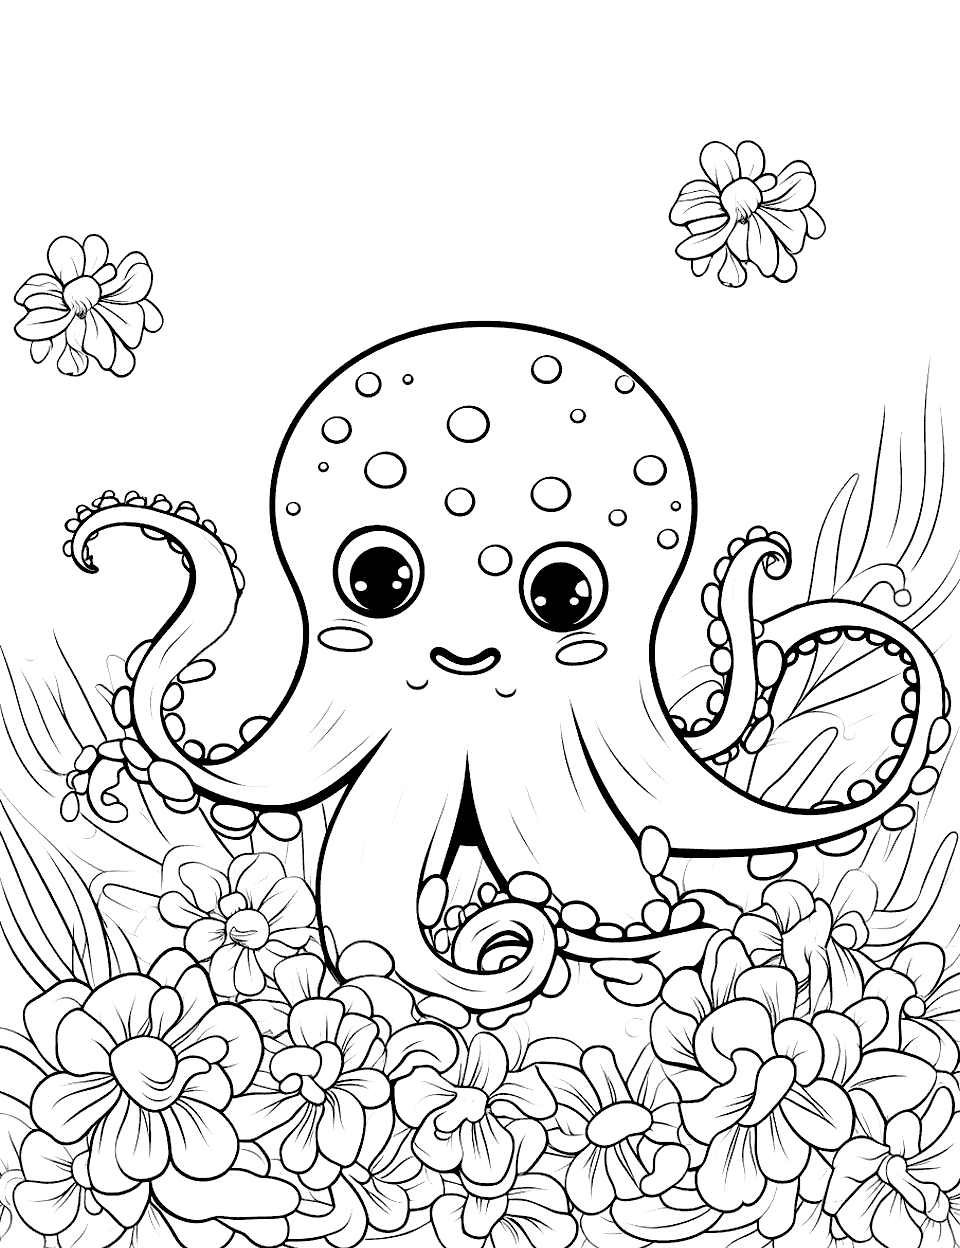 Octopus and Its Sea Anemone Home Coloring Page - An octopus peeking out from its cozy sea anemone home.